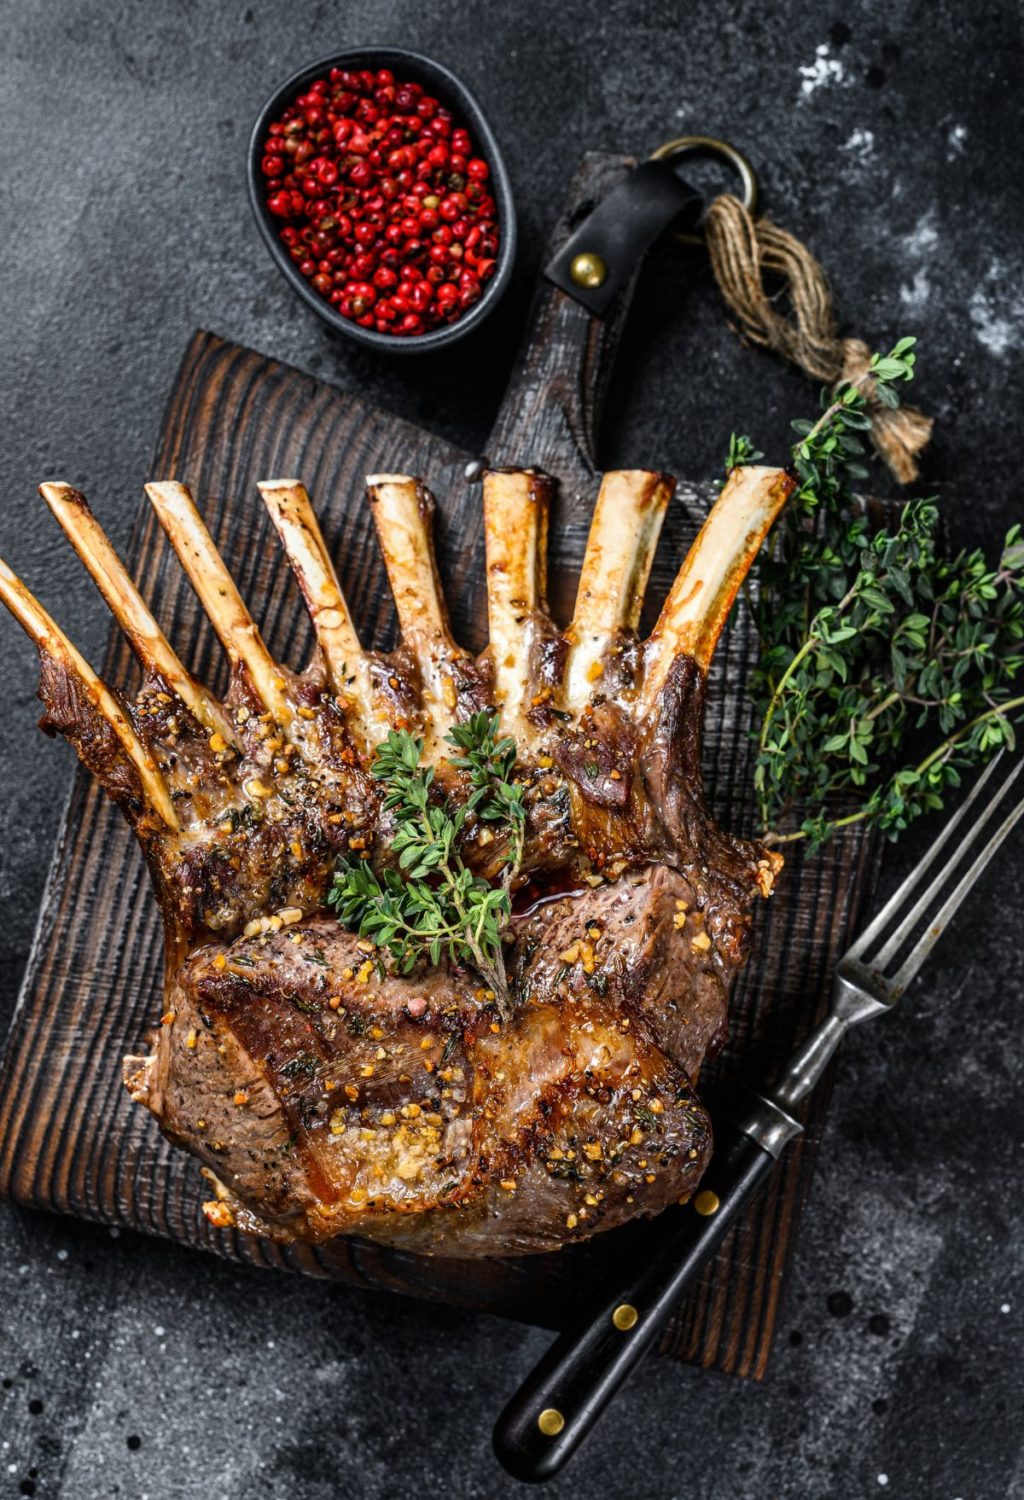 A rack of lamb with herbs and spices on a wooden cutting board.